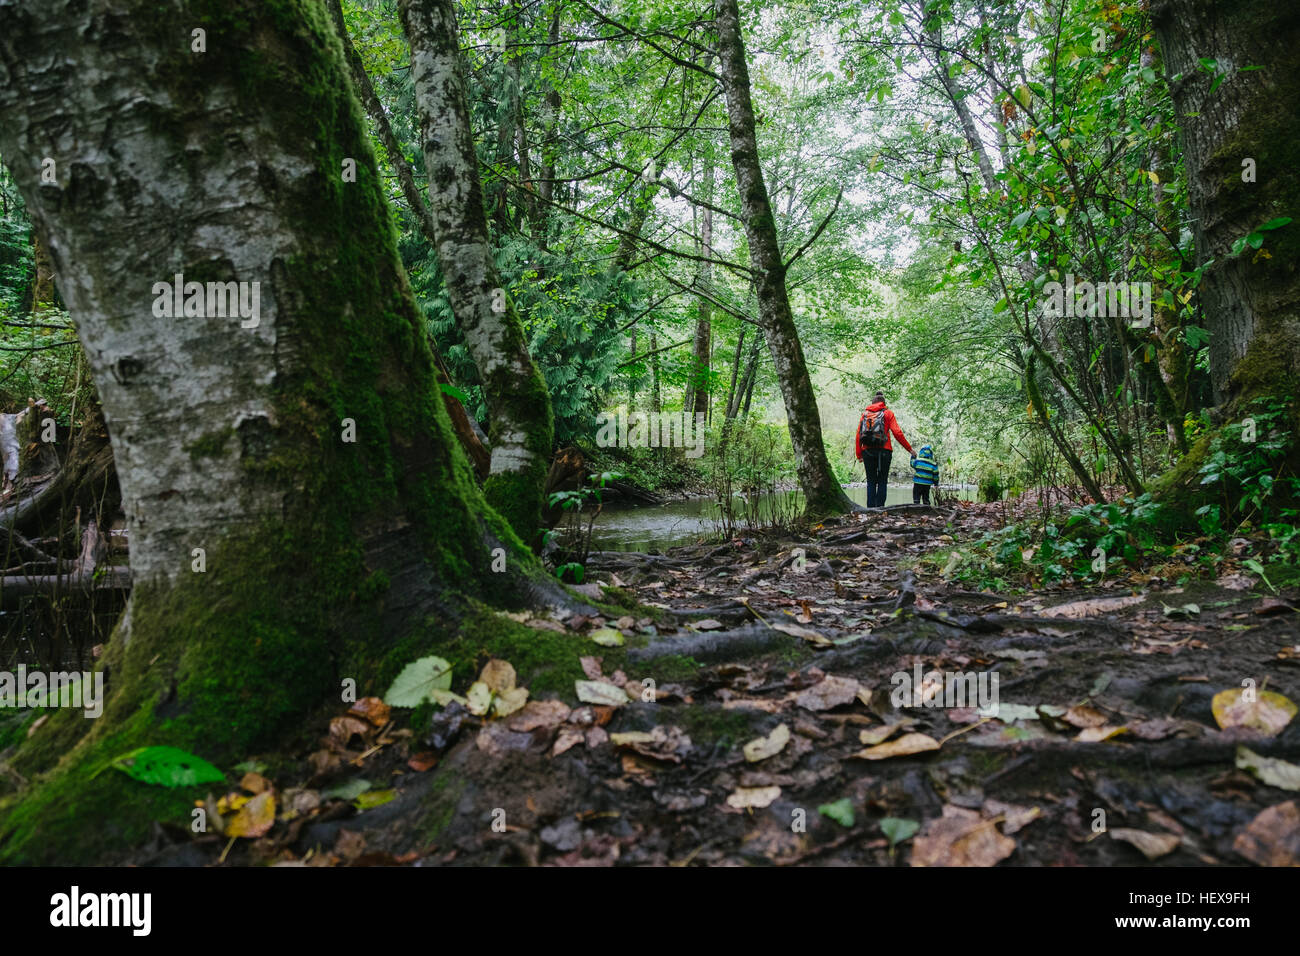 Mother and son walking through forest, rear view, Vancouver, British Columbia, Canada Stock Photo